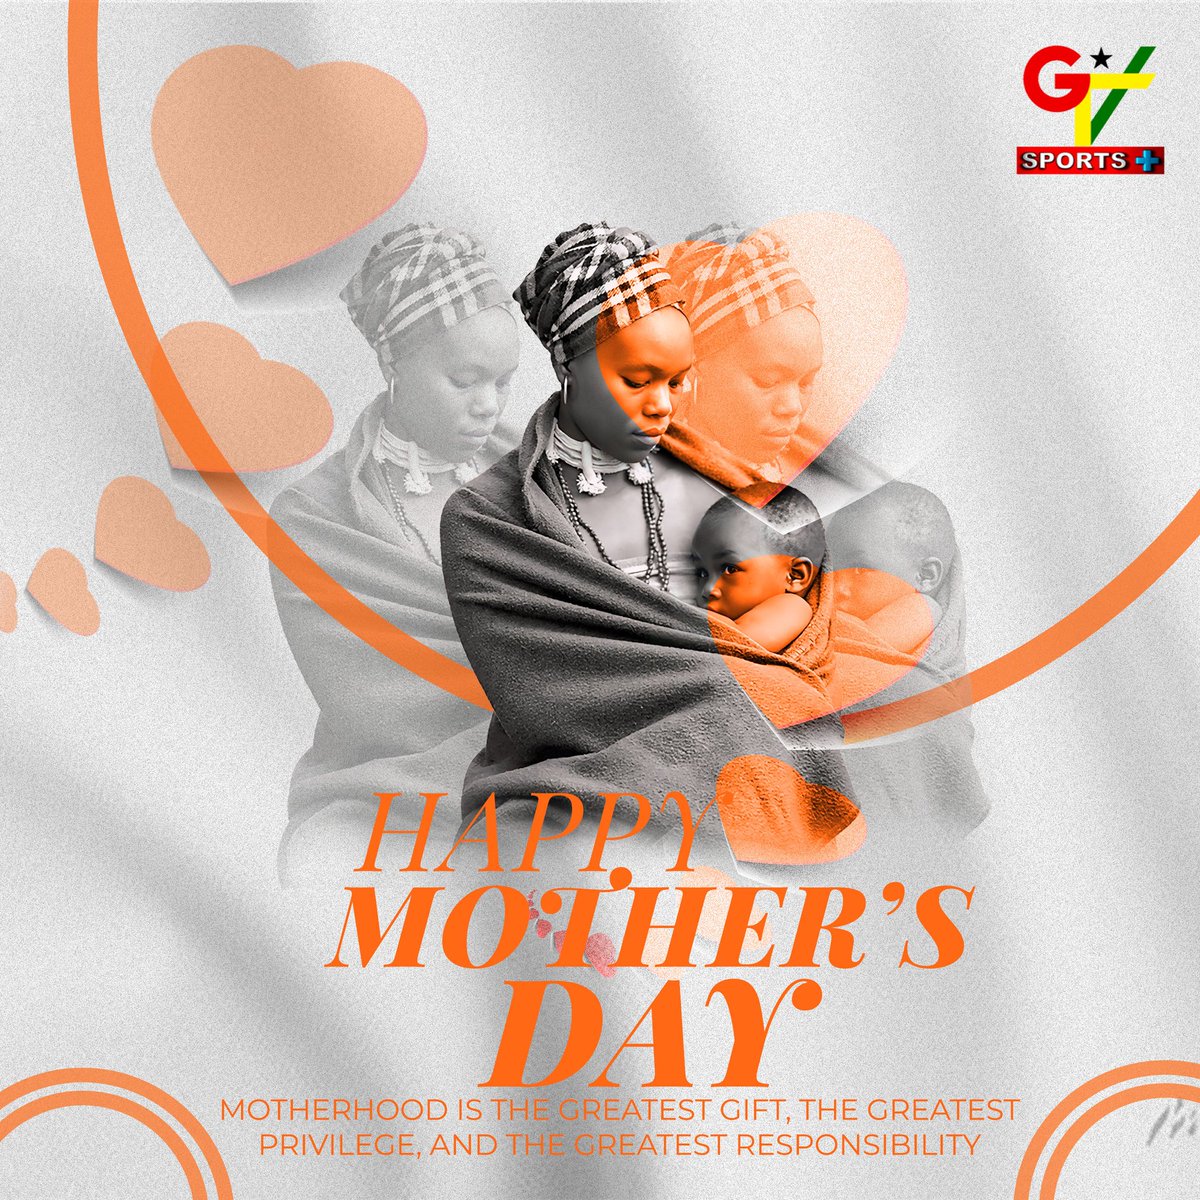 Mothers have a special place in our hearts, and they always will.

Today, we say thank you to our mothers for all the love and care they have given us.

Happy Mother's Day to all the mothers!

#GTVSports